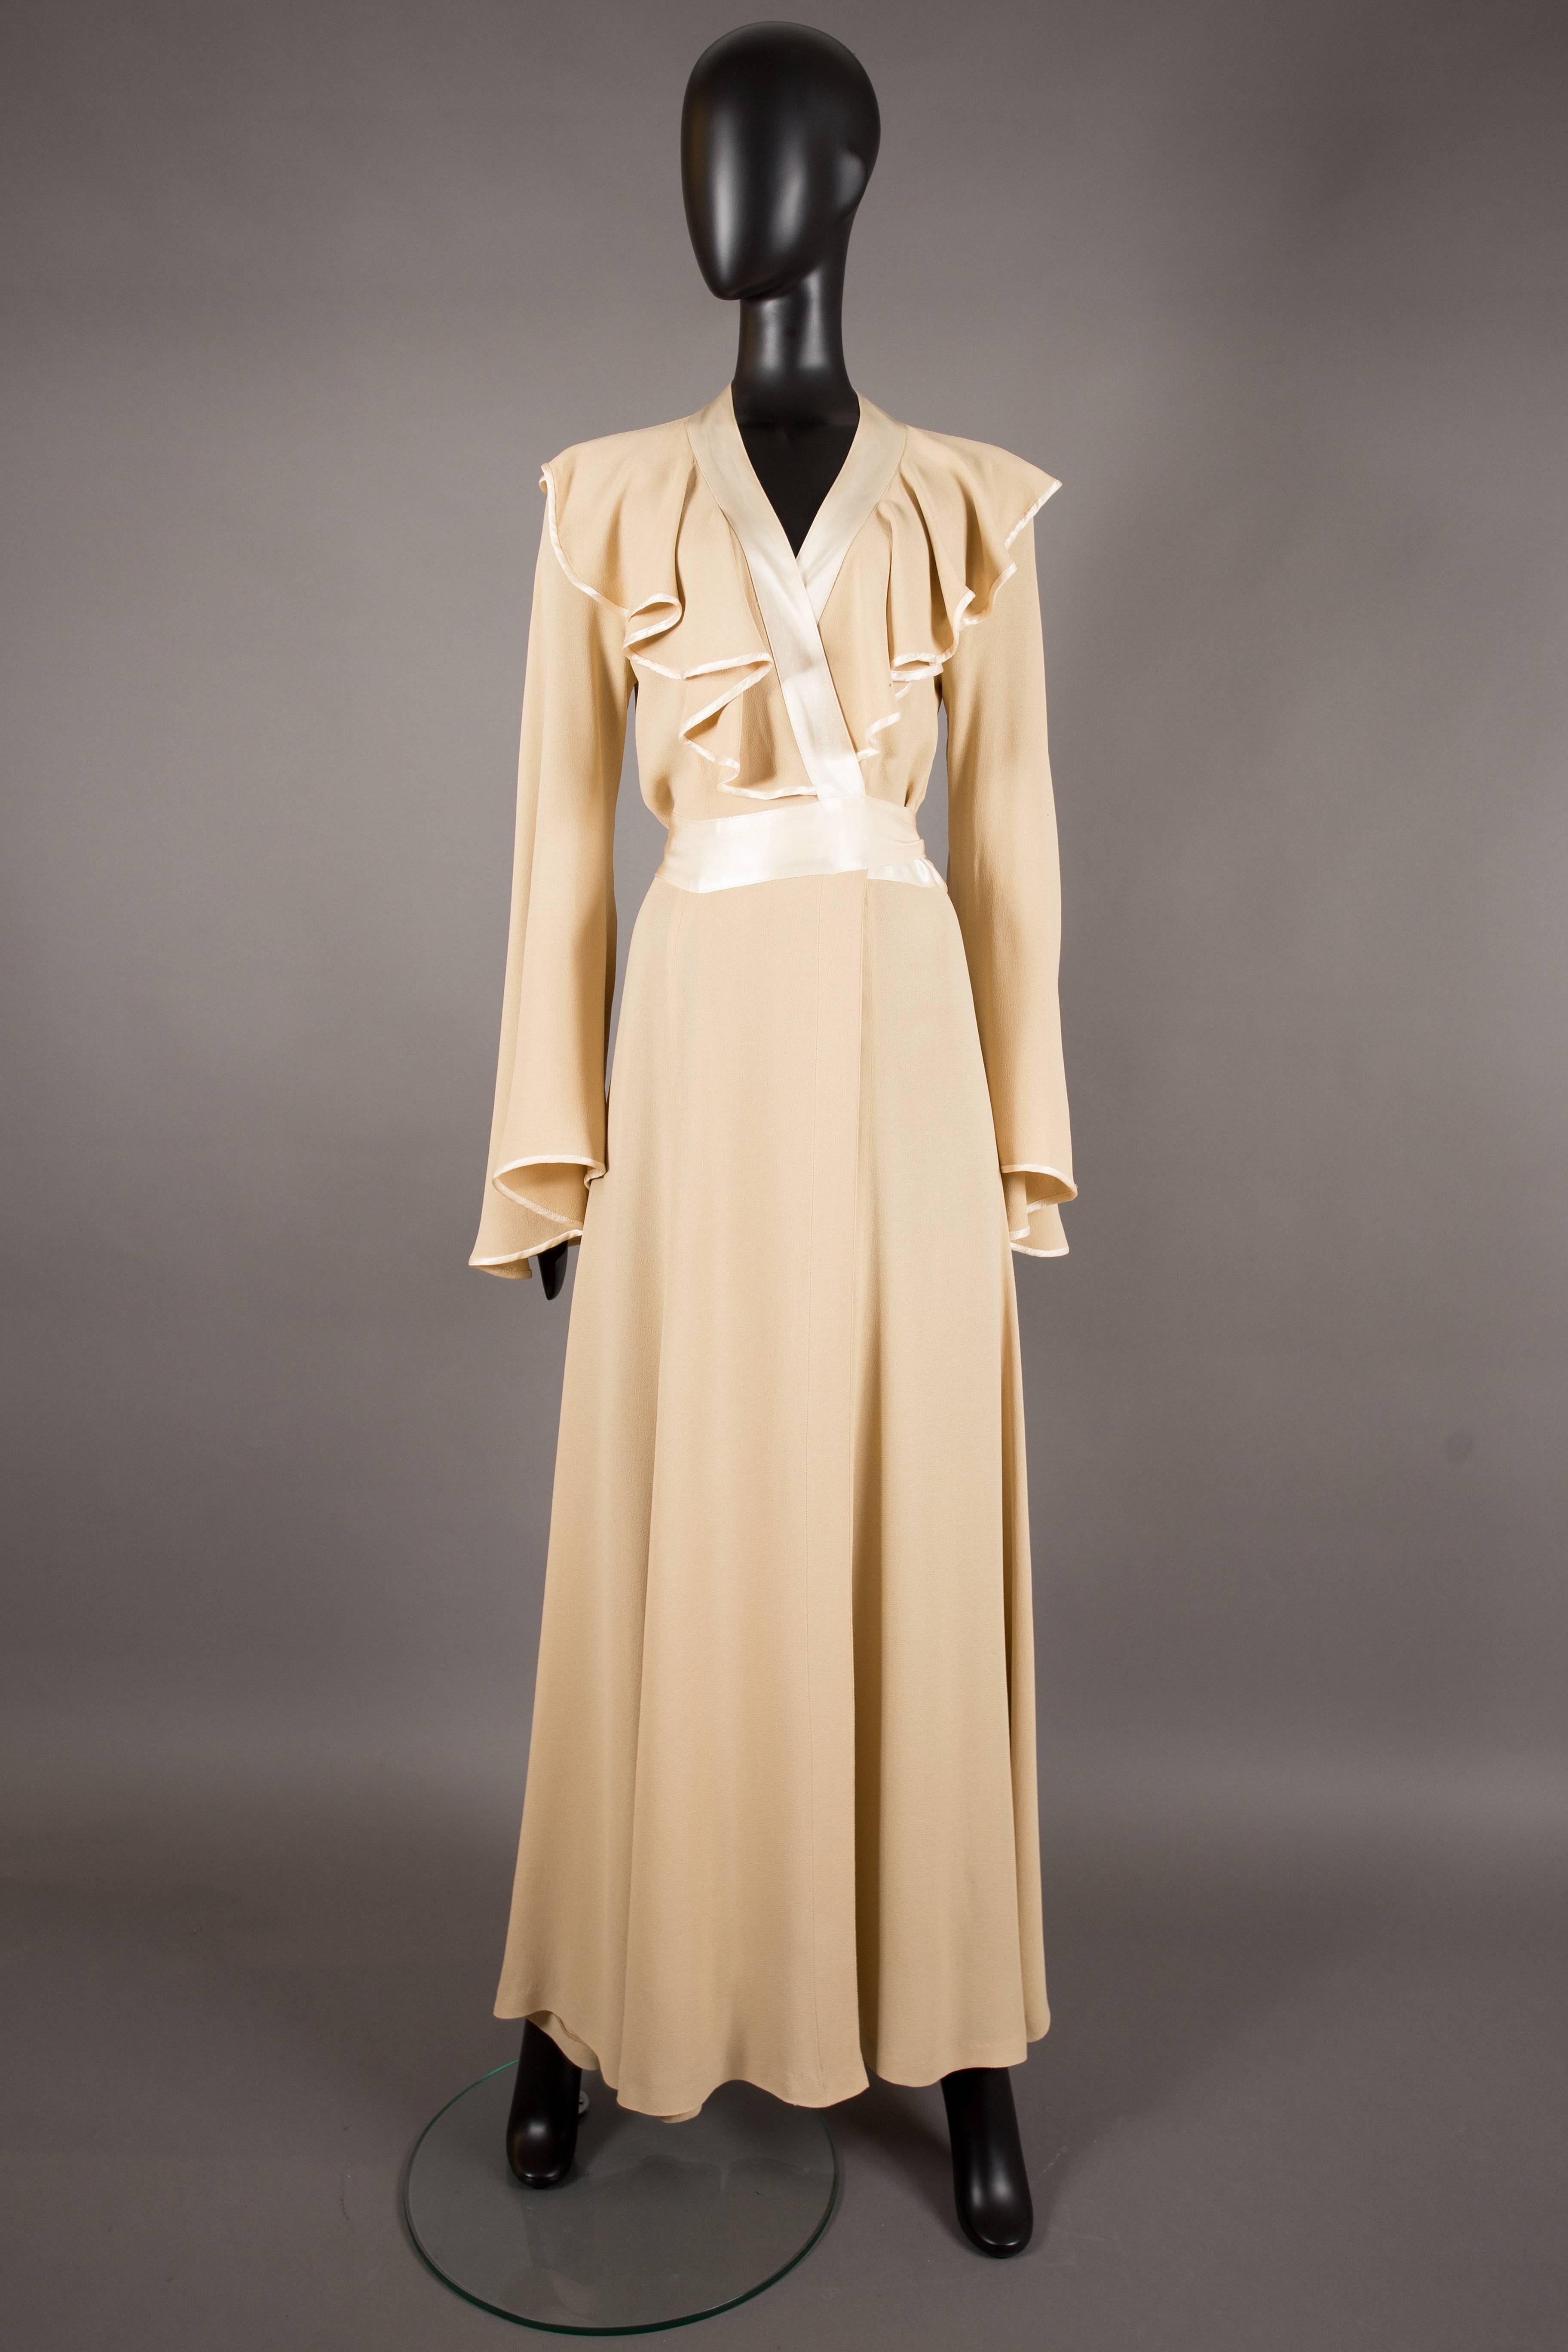 Ossie Clark couture champagne evening wrap dress, circa 1970 2